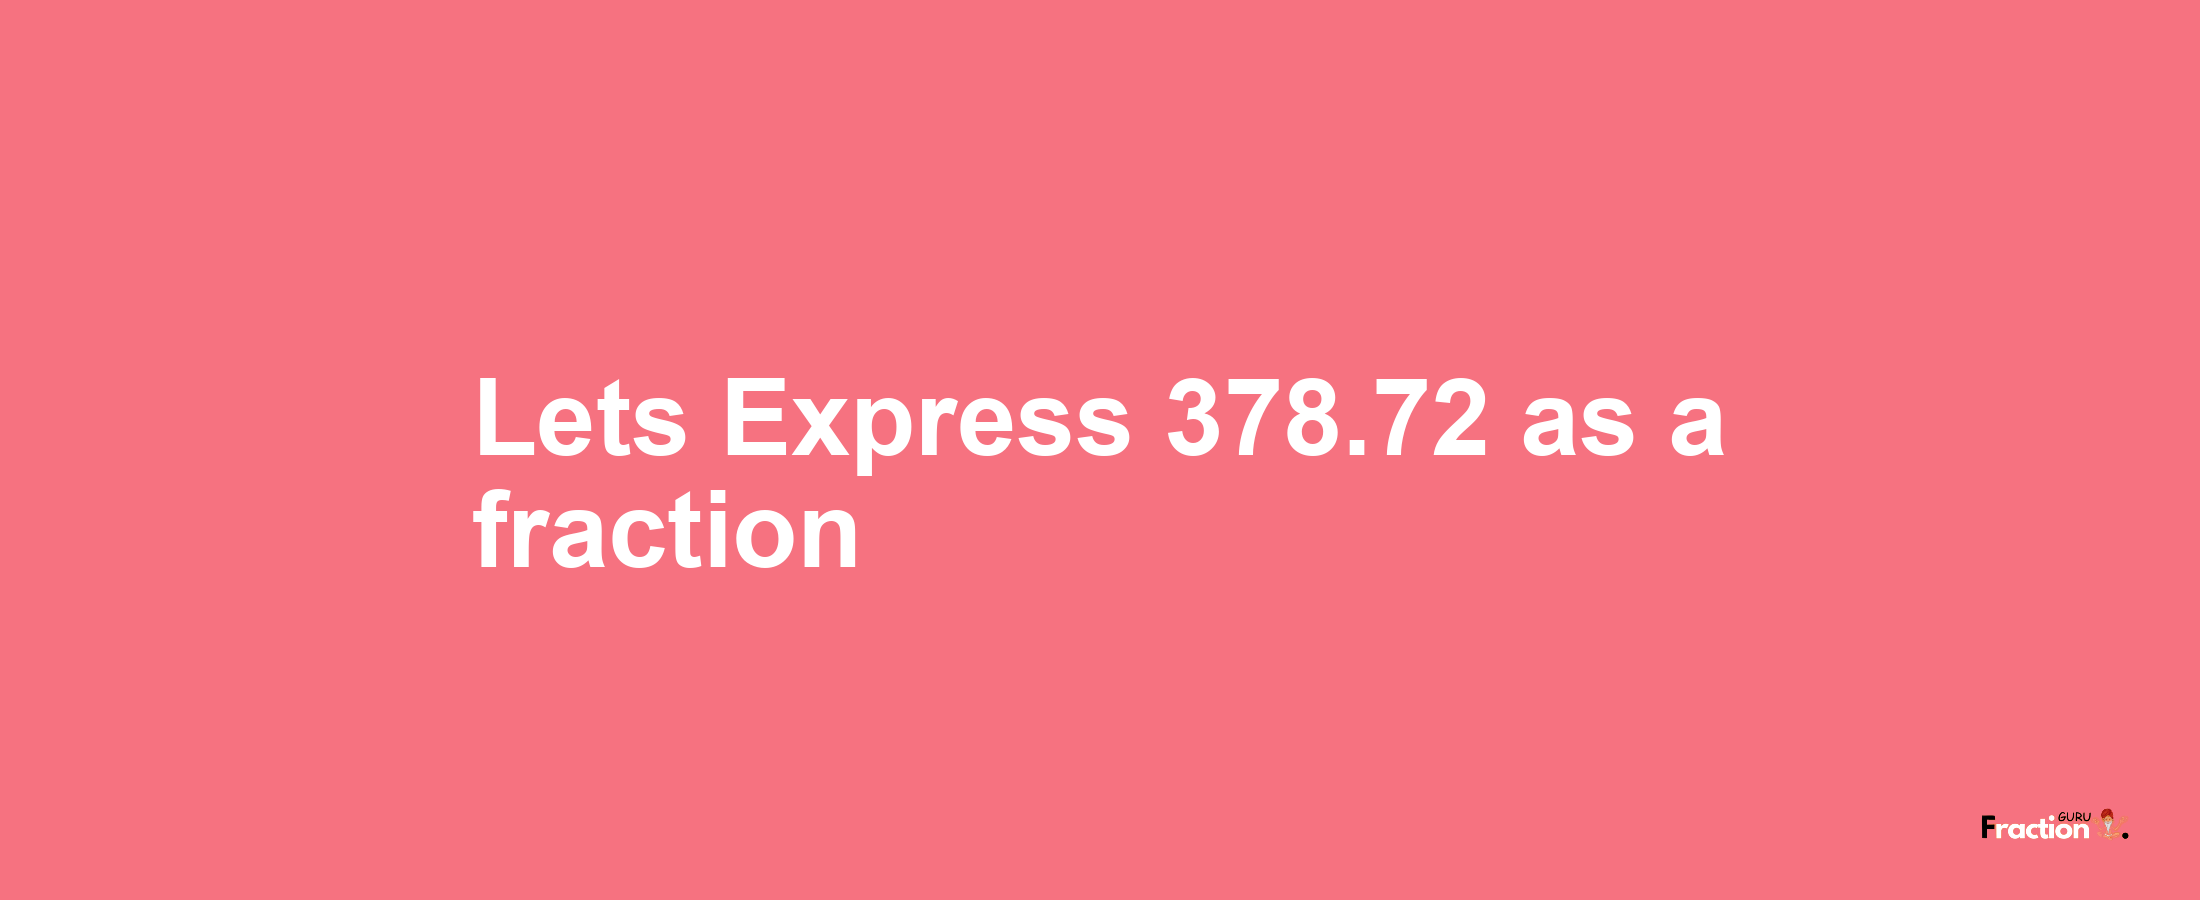 Lets Express 378.72 as afraction